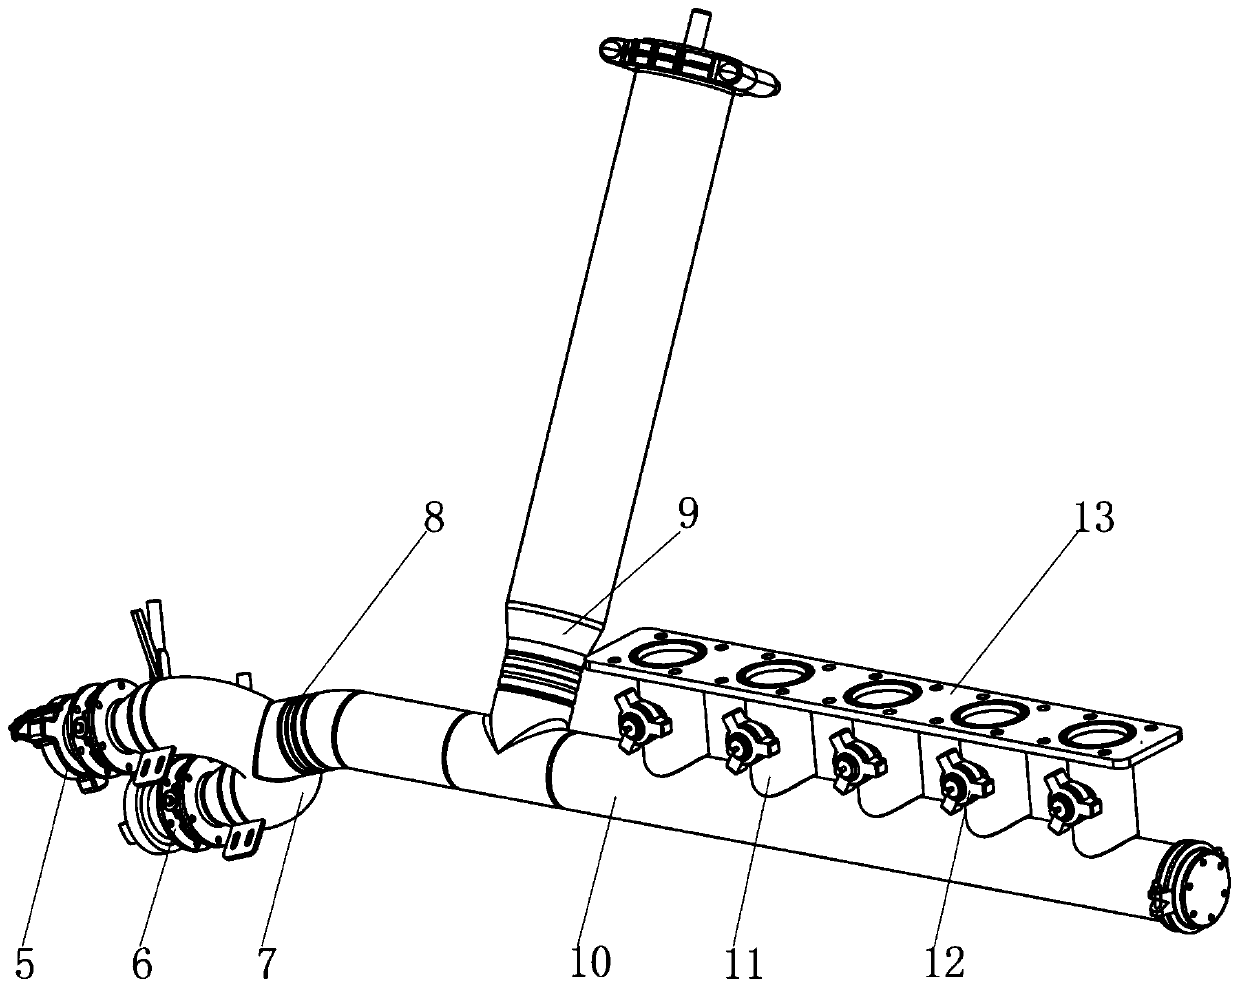 Manifold system capable of realizing low-pressure suction and high-pressure discharge